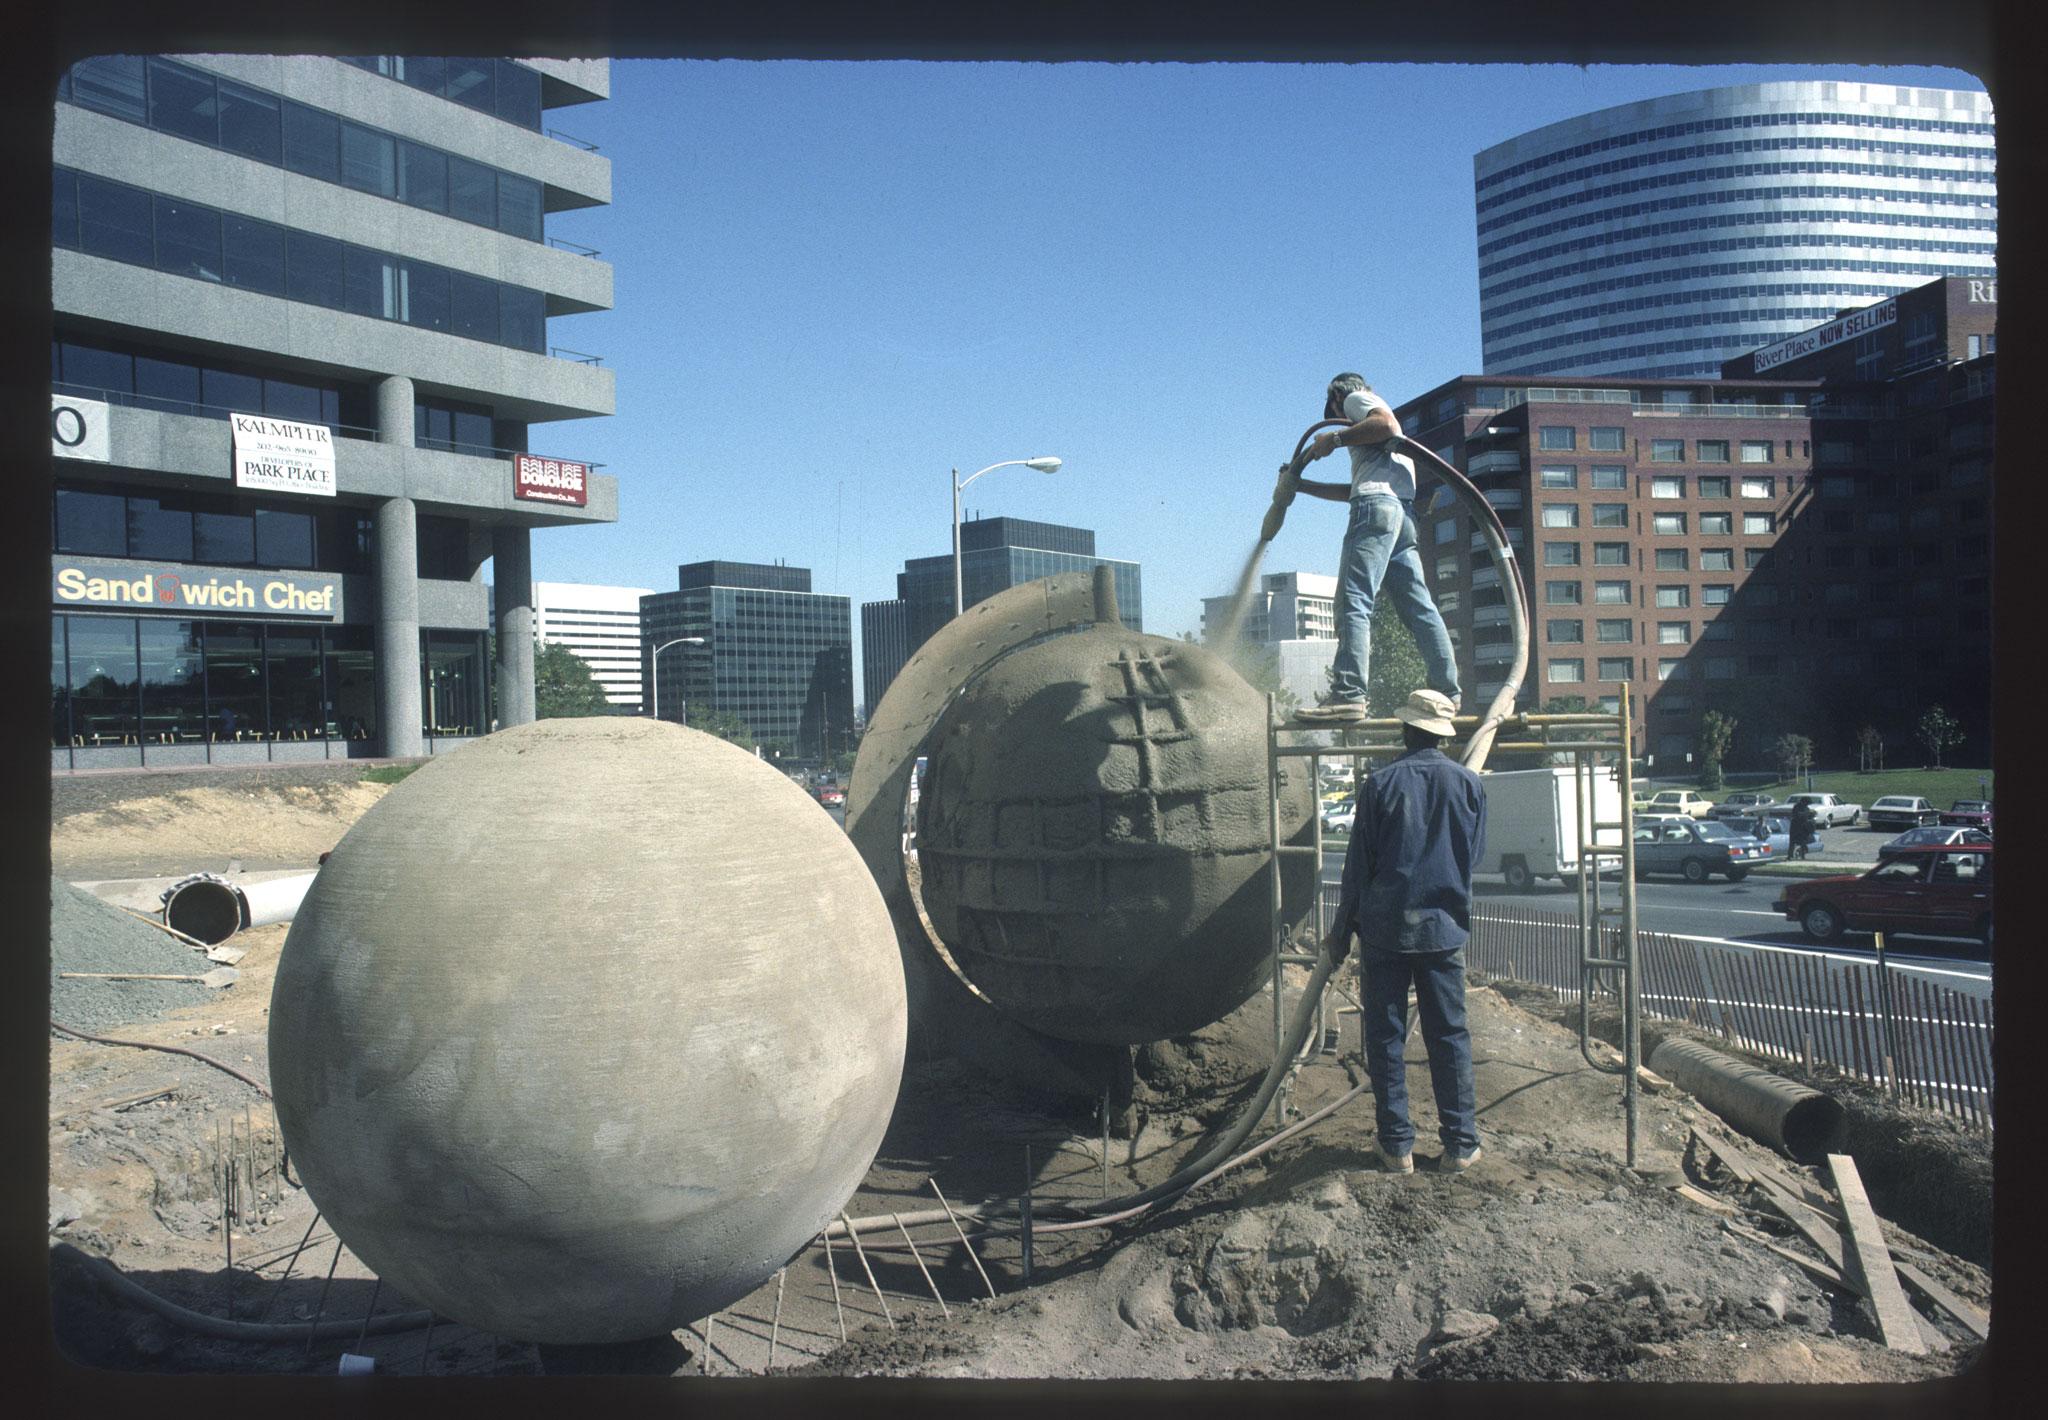 two people shooting concrete onto a large sphere in an urban setting